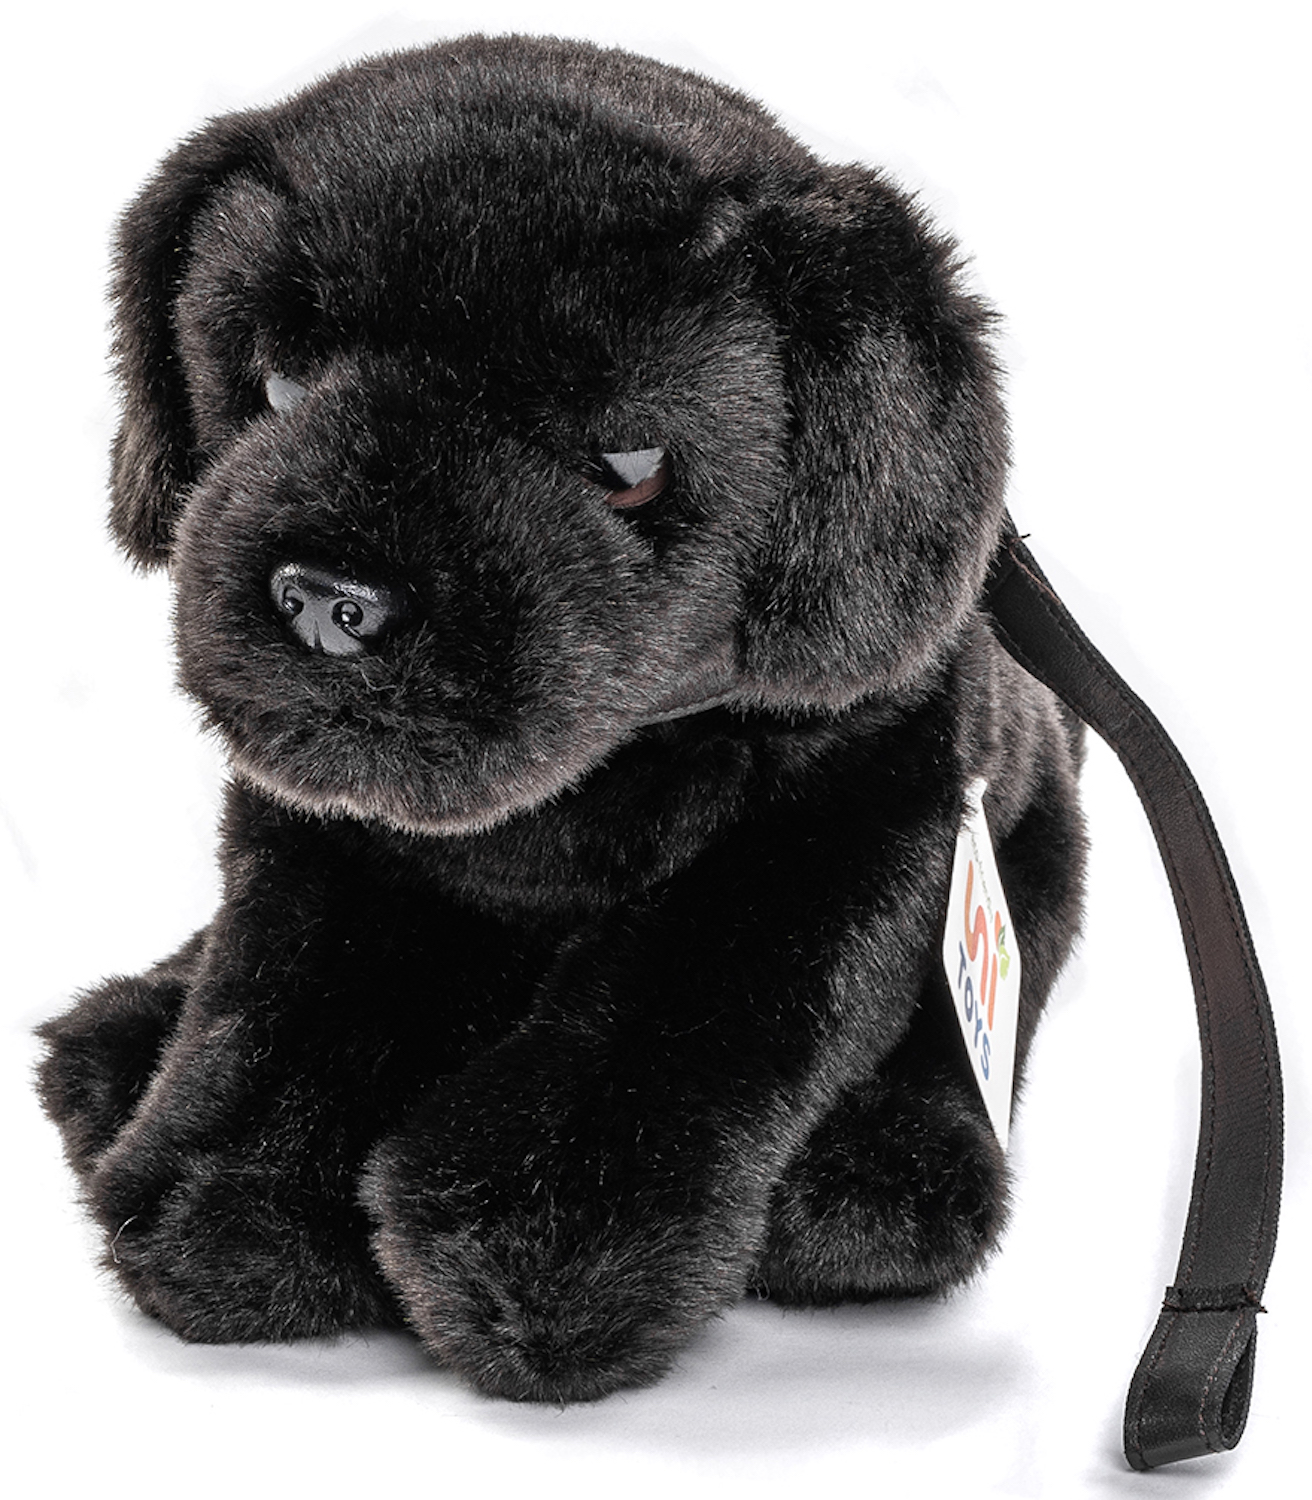 Labrador puppy (black), with leash - 23 cm (height)